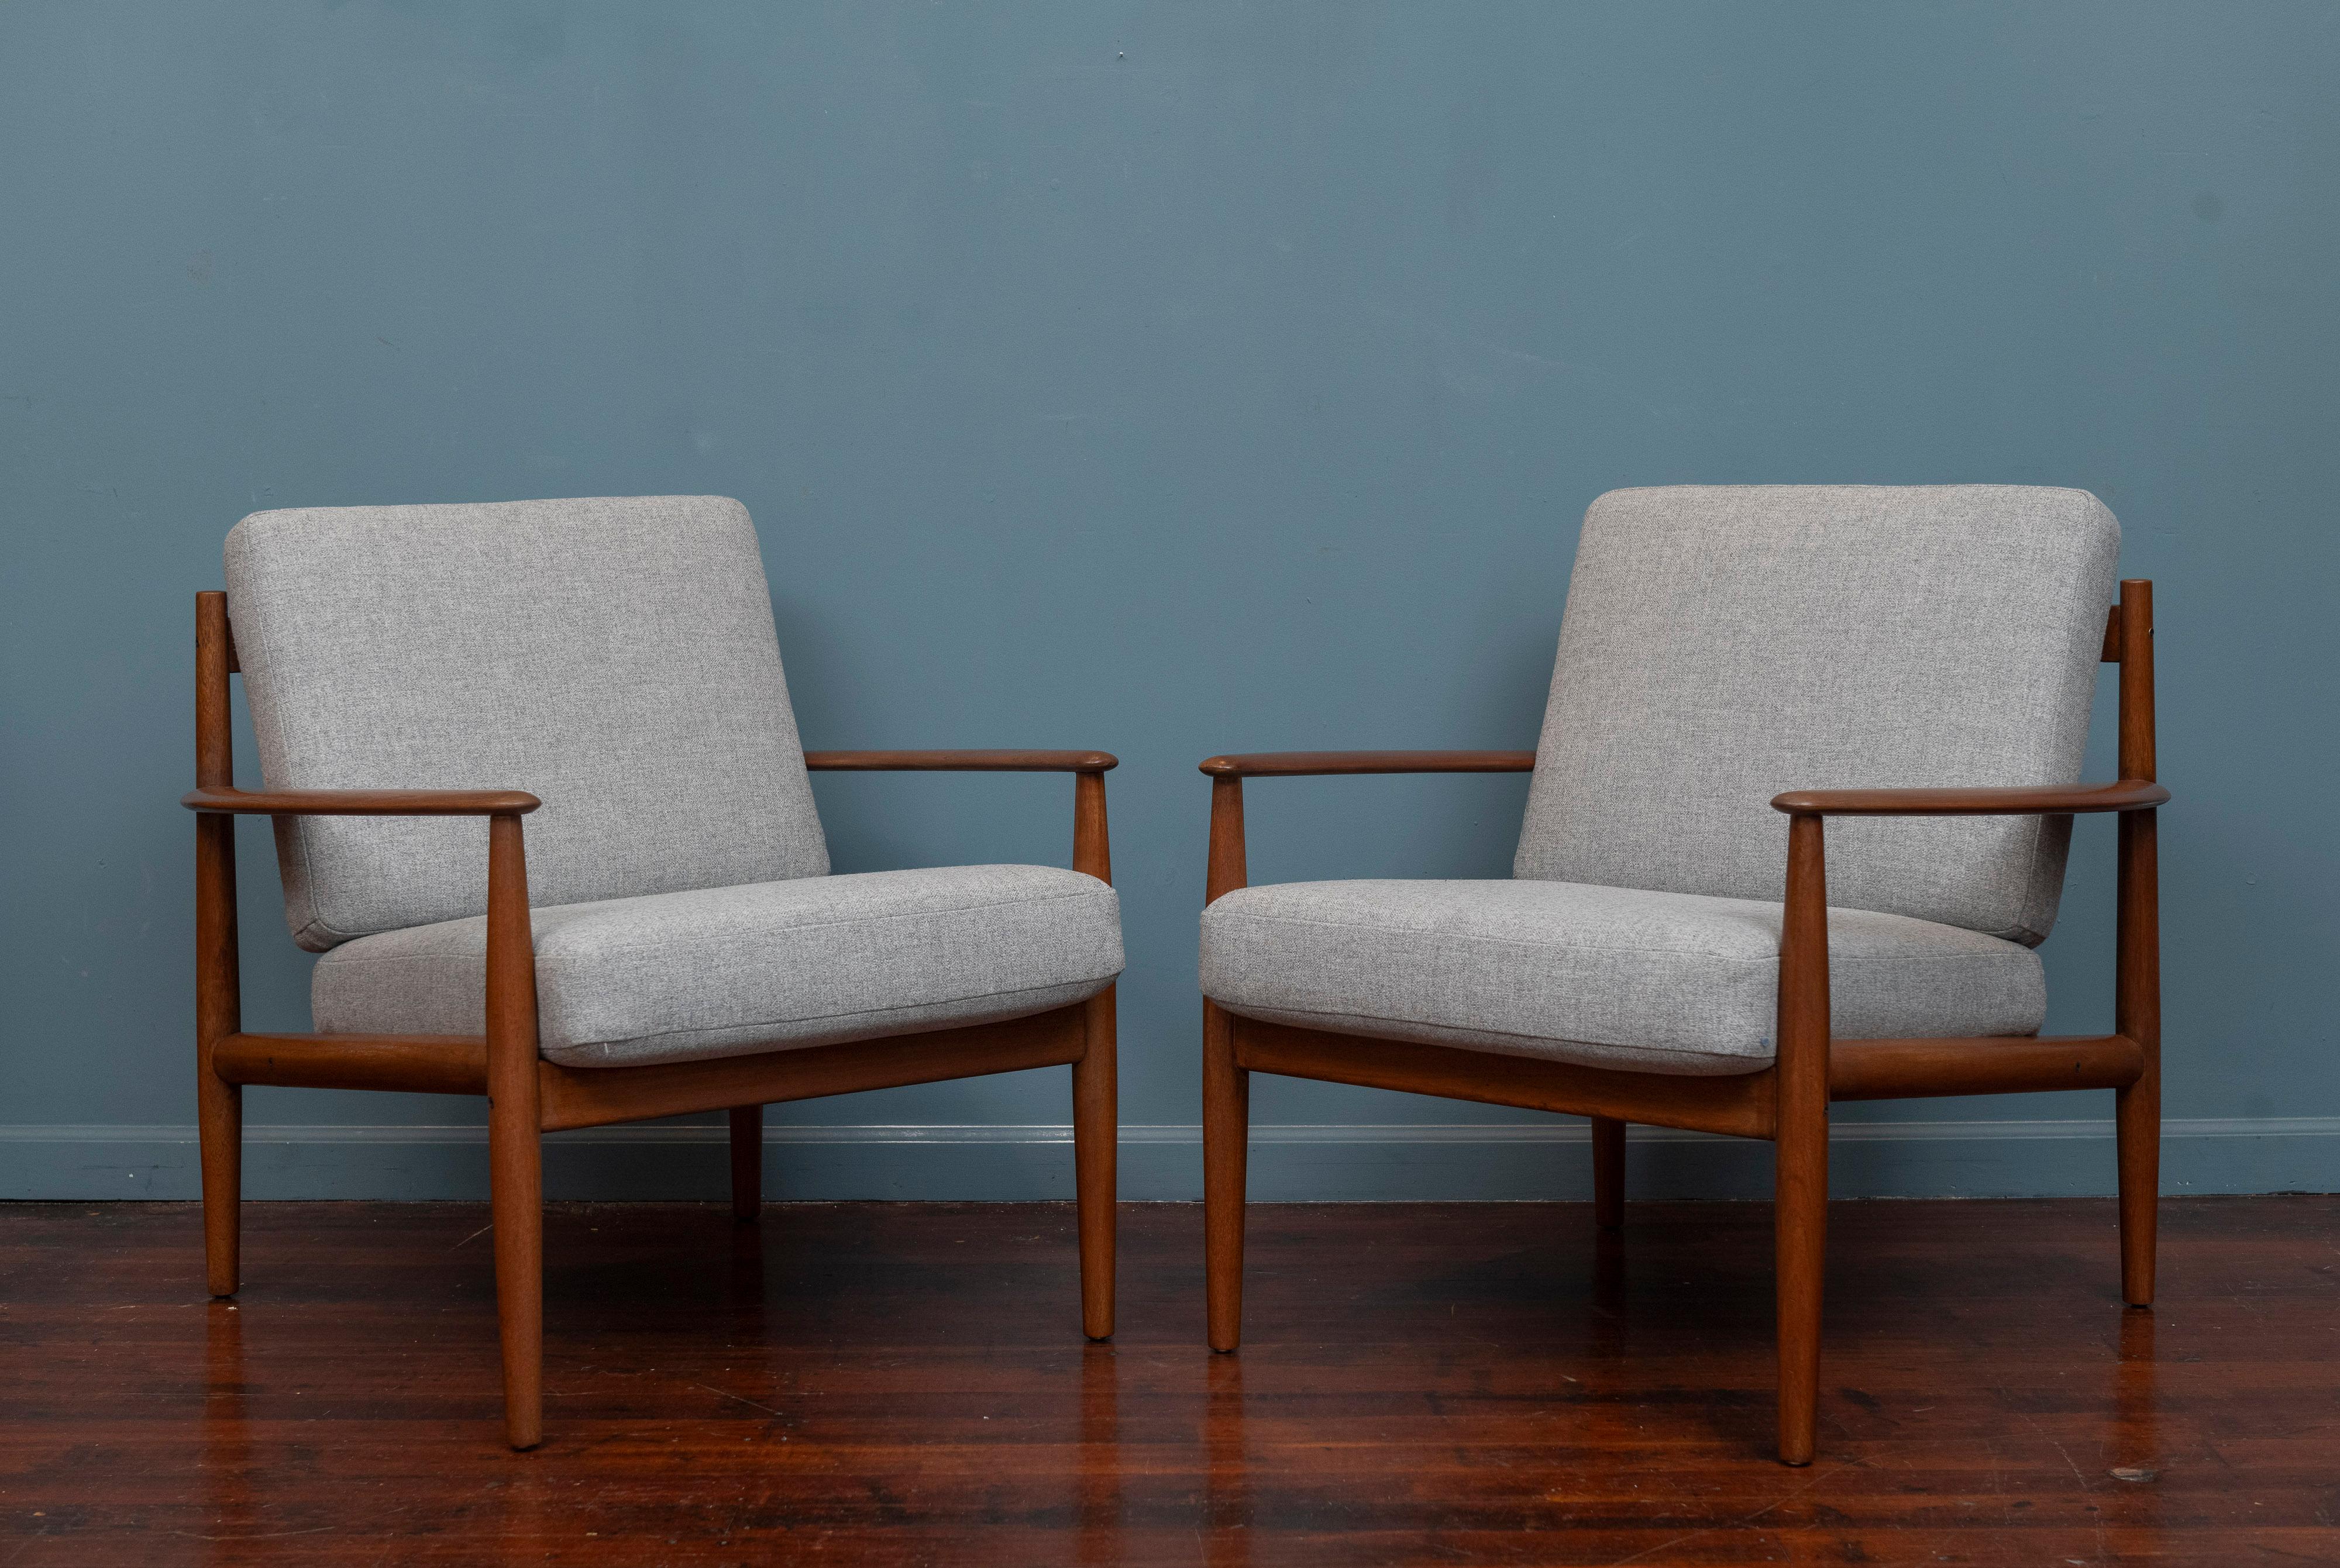 Grete Jalk design lounge chairs, Model 128 for France & Son Denmark. Beautiful design lounge chairs with curved arms and an attractive double splat back. Refinished teak wood frames just newly upholstered in 100% grey wool. These elegant chairs are